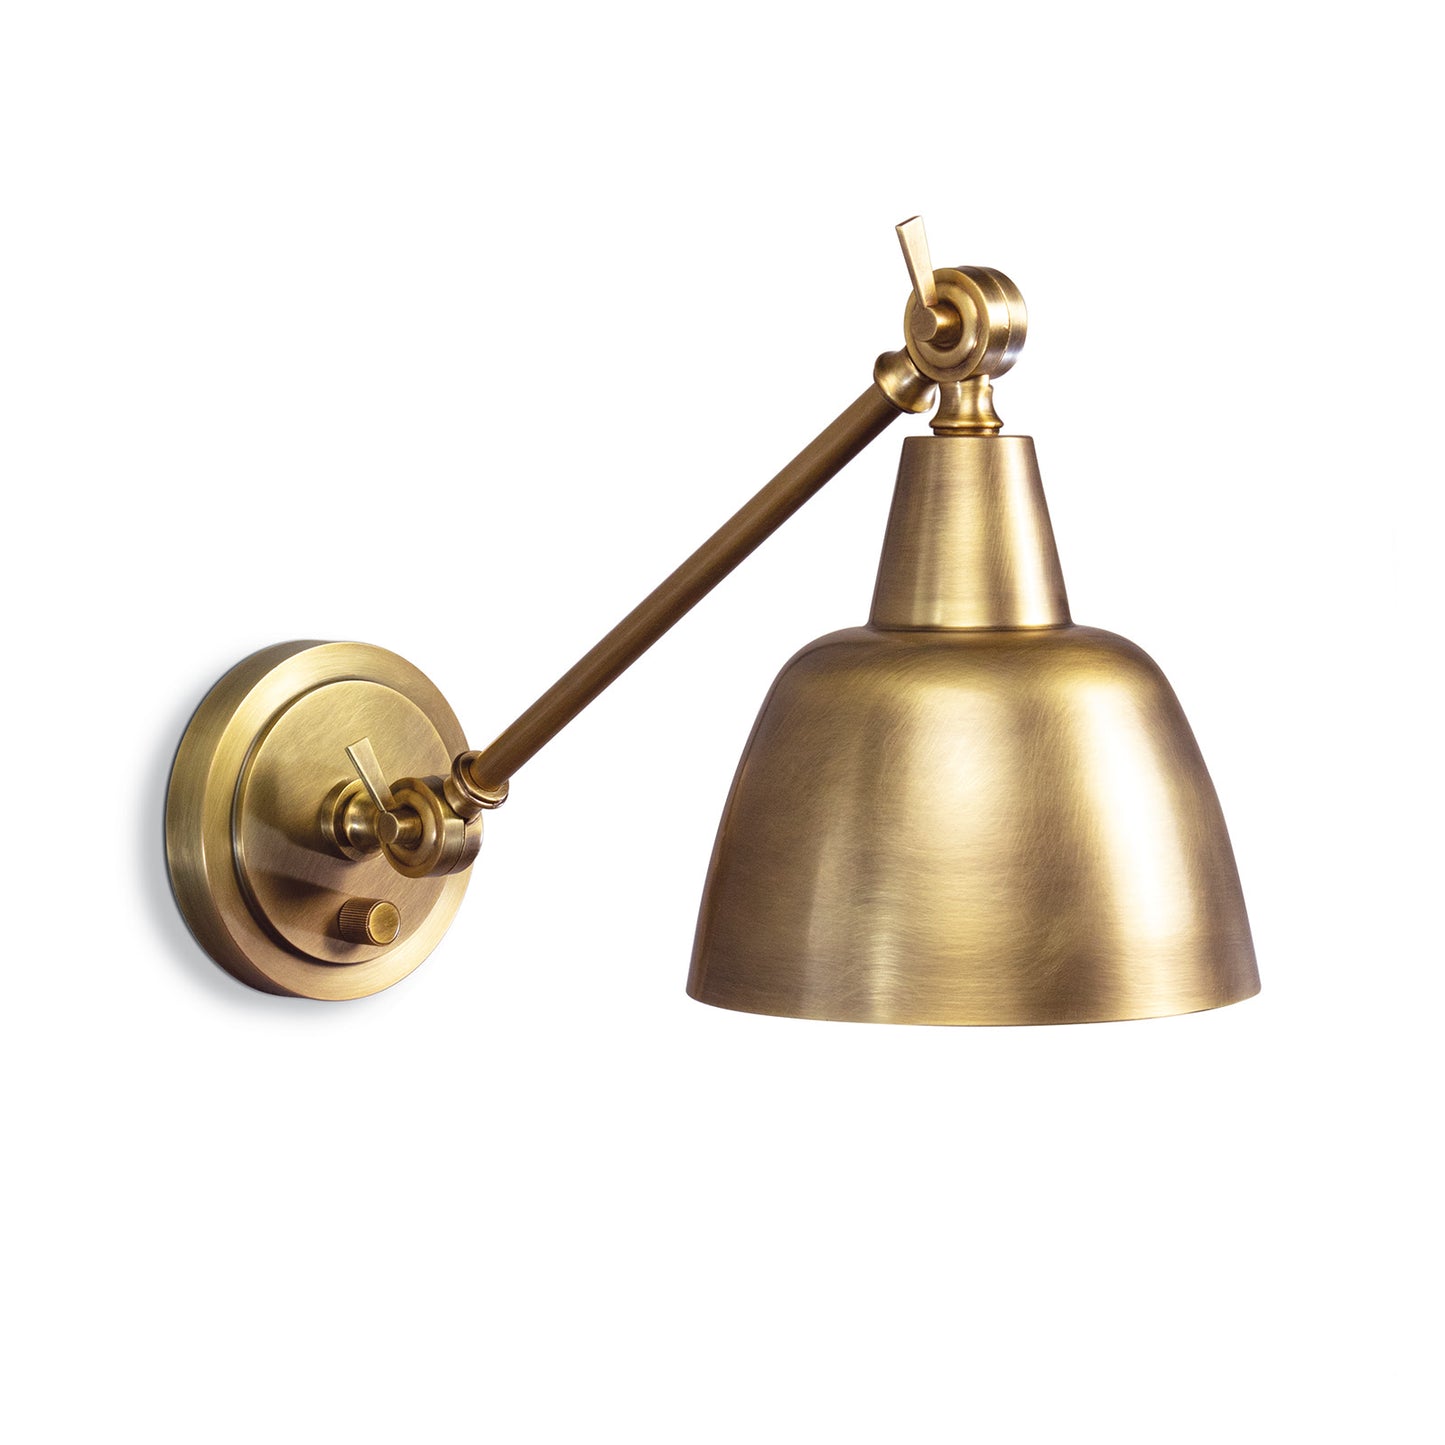 Mercantile Sconce in Natural Brass by Southern Living